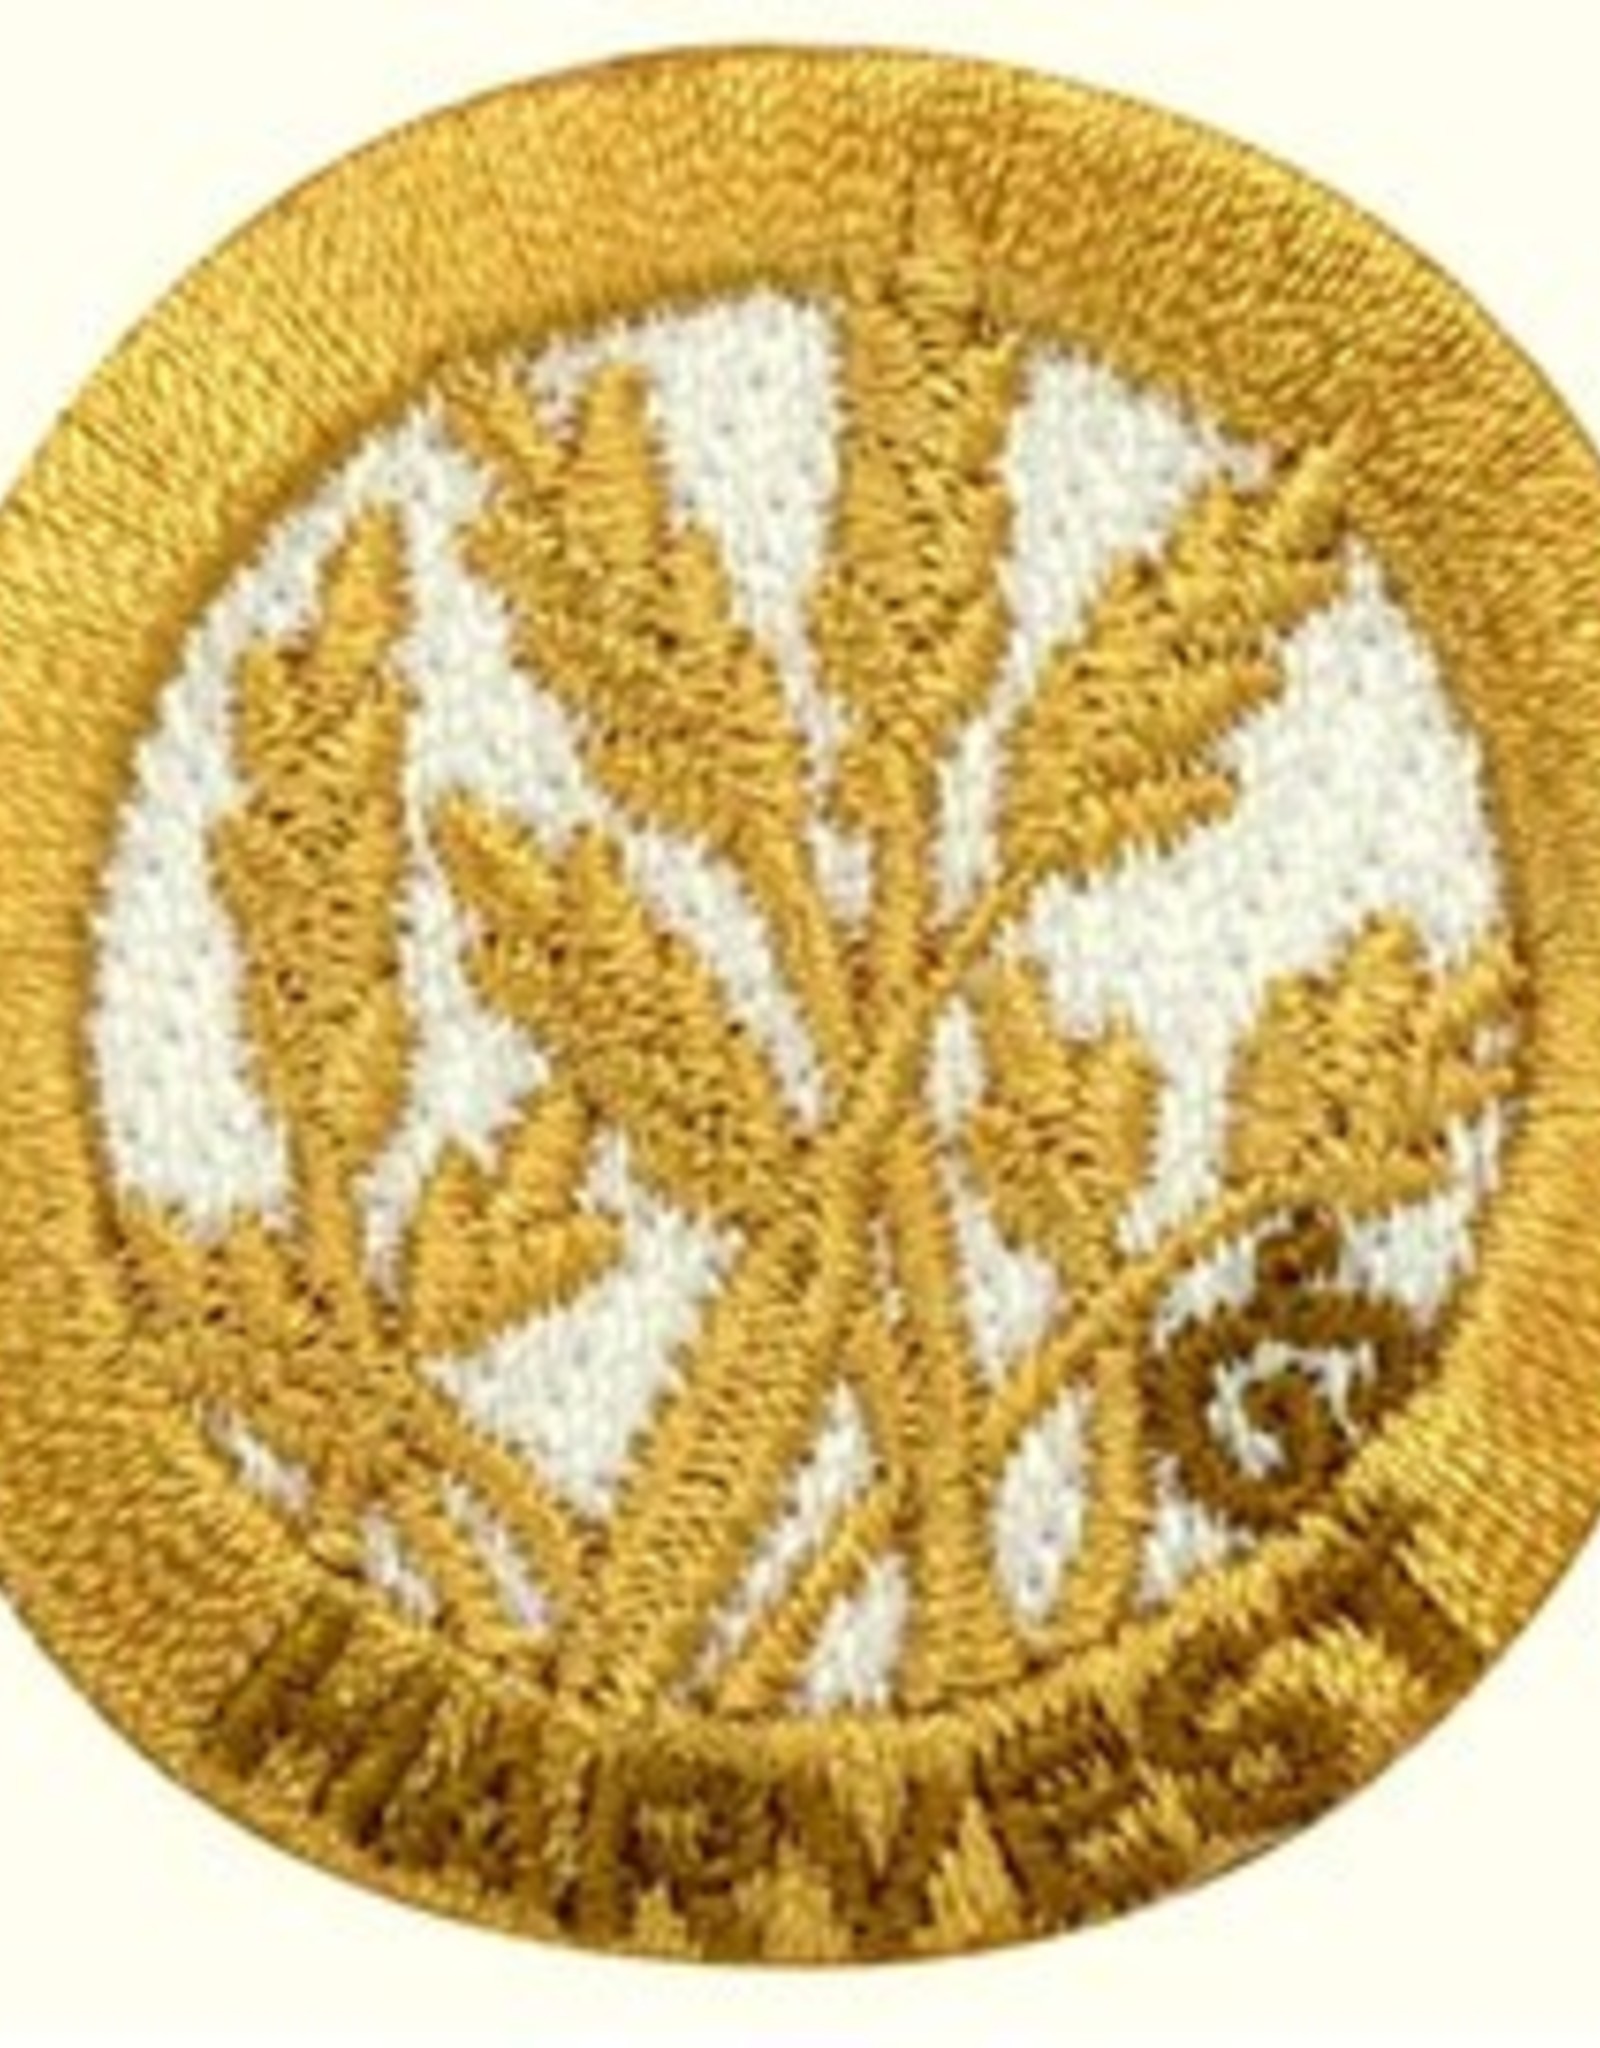 GIRL SCOUTS OF THE USA Senior Sow What Award Patch